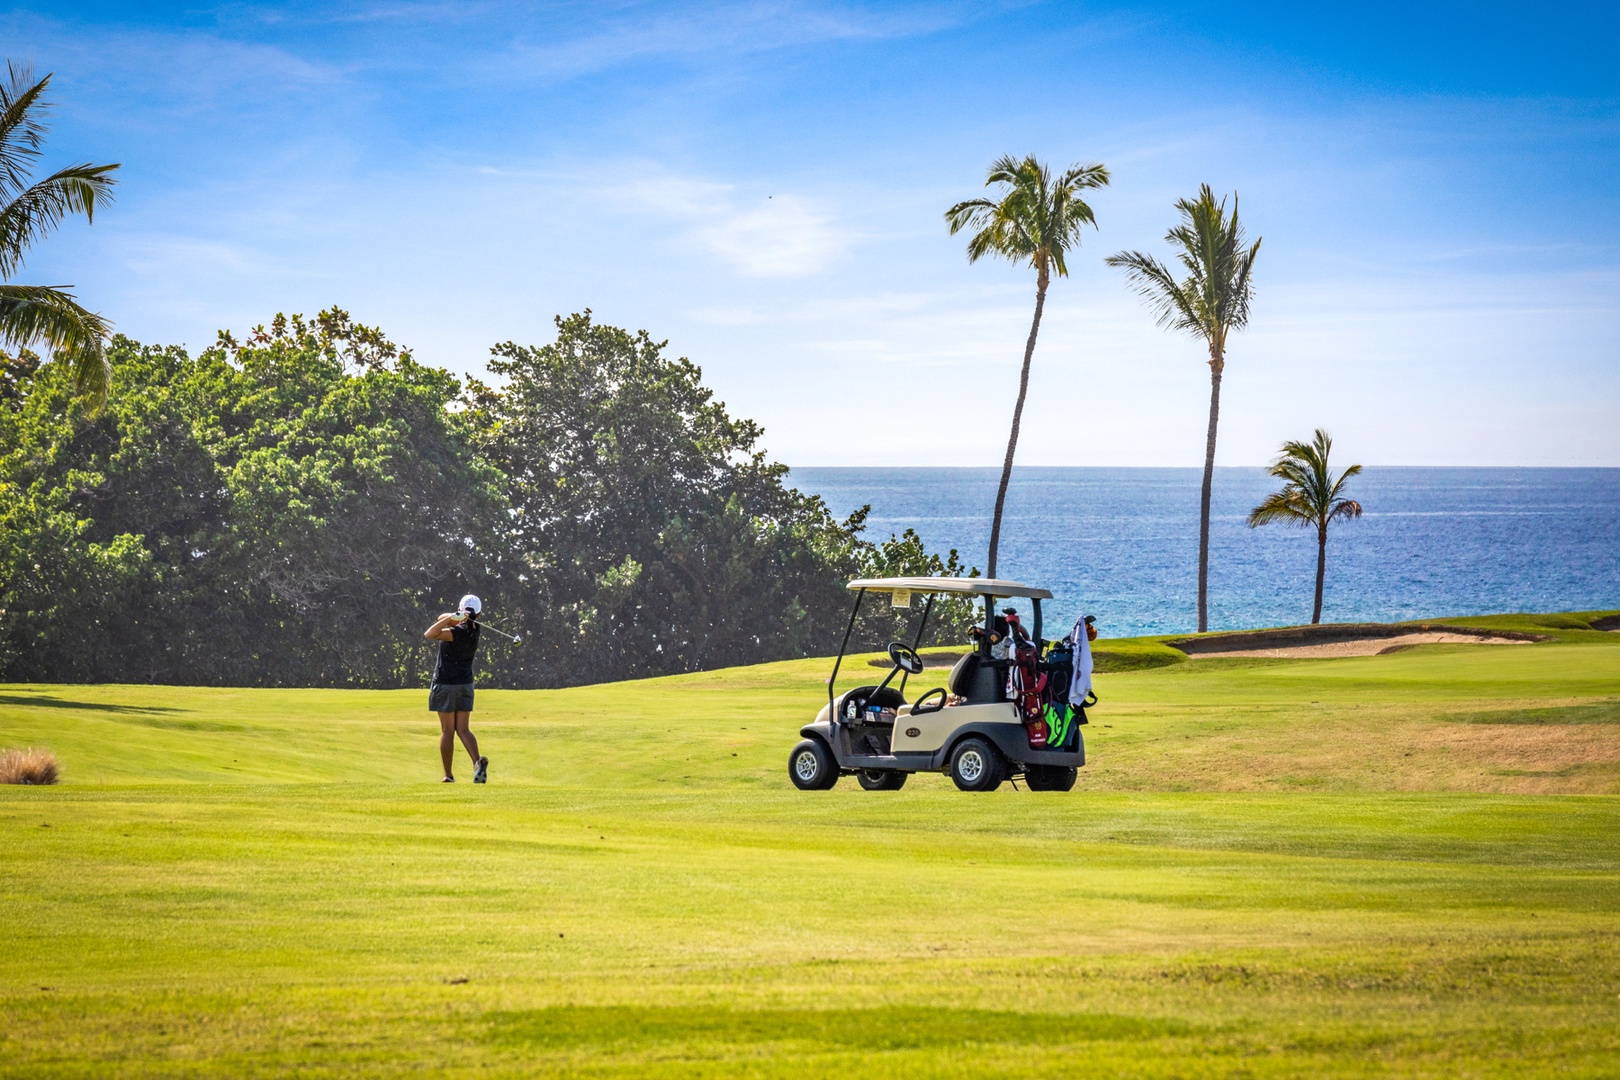 Waikoloa Vacation Rentals, 2BD Hali'i Kai (12C) at Waikoloa Resort - Some of the most beautiful golf on earth available just steps outside the condo.